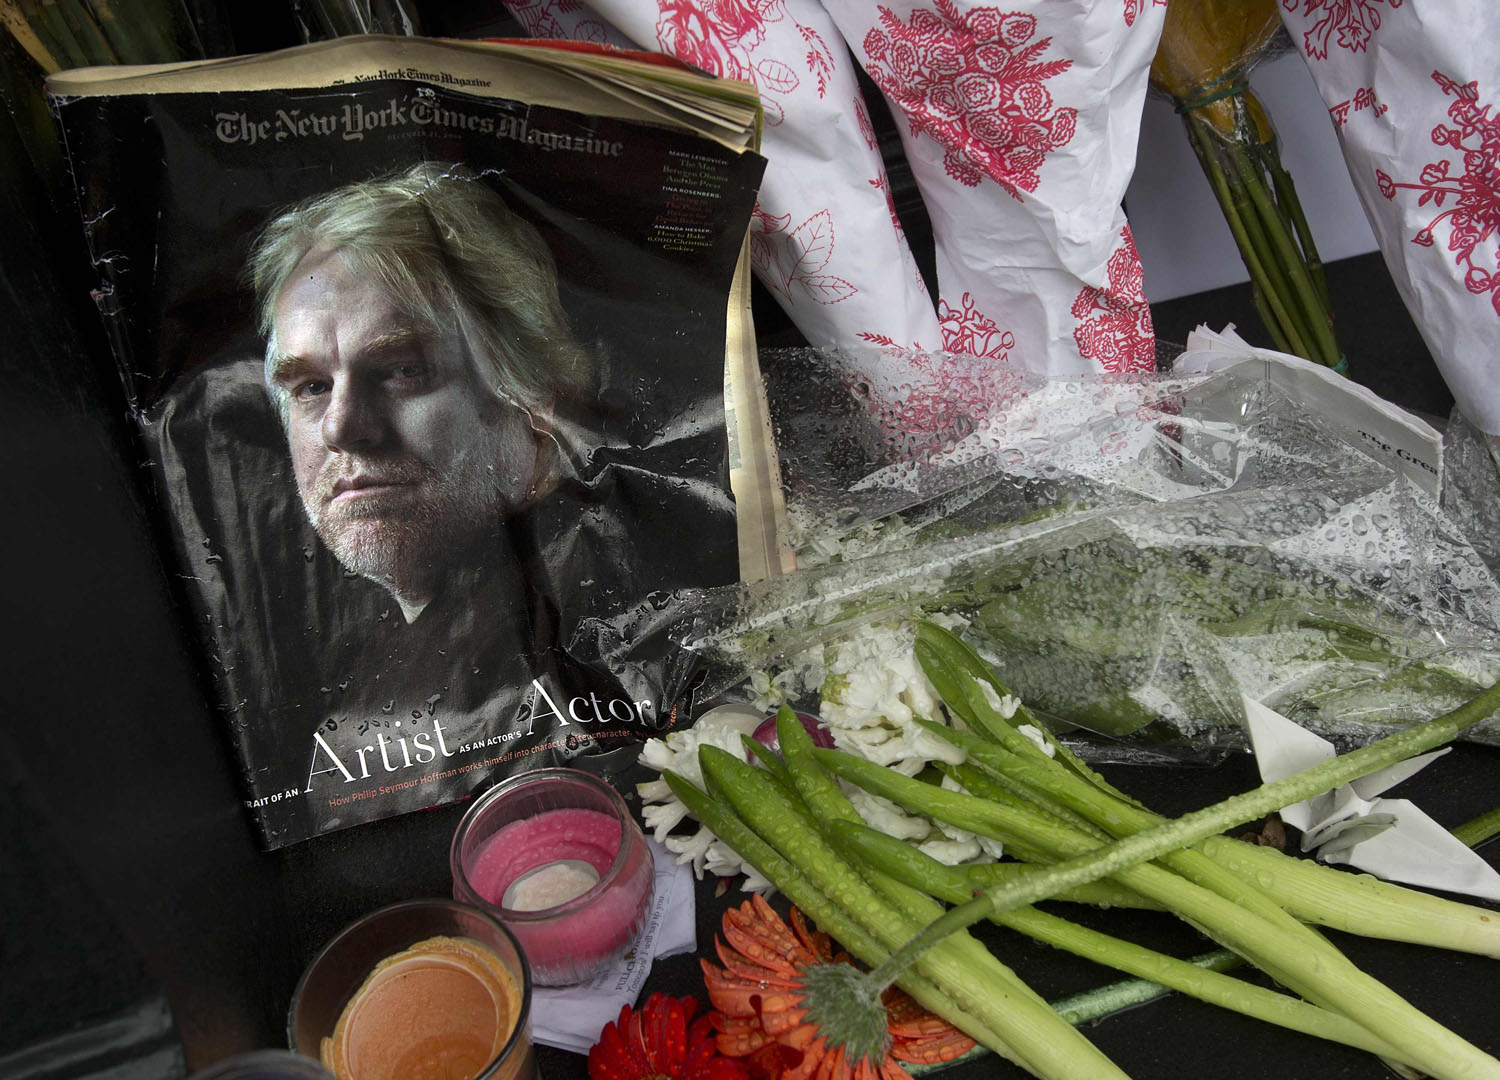 A copy of a New York Times Magazine with a photo of movie actor Philip Seymour Hoffman on the cover in a memorial in front of his apartment building in New York City, on Feb. 3, 2014.